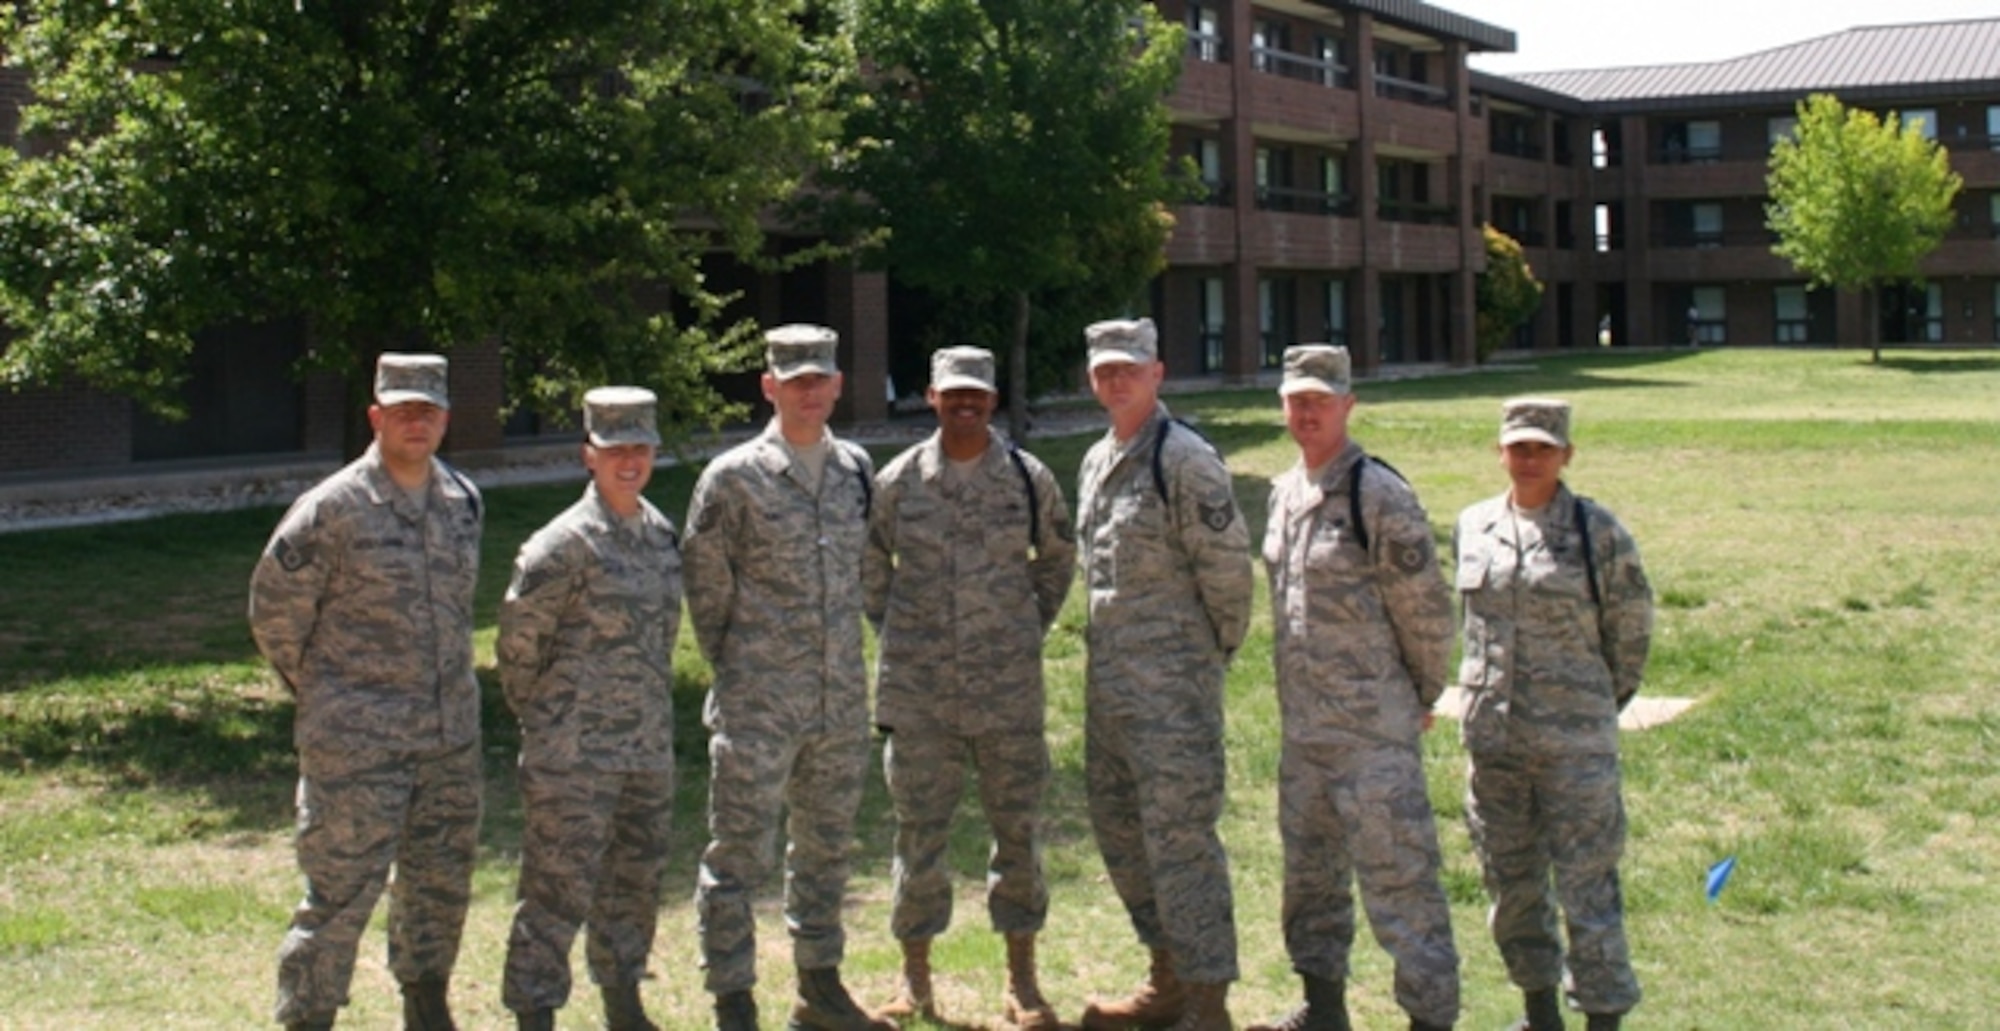 Military Training Leaders provide solid groundwork that help our professional Airmen become successful. MTLs from the 315th Training Squadron are (from left): Staff Sgt. Julio Castillo-Zuluaga, Staff Sgt. Amy Taylor, Tech. Sgt. Kenneth Kimble, Staff Sgt. Derrell Speights, Staff Sgt. Timothy Braden, Tech. Sgt. David Alonso and Staff Sgt. Charmaine Moss. Not pictured: Staff Sgt. Ray Wisdom. (U.S. Air Force photo)